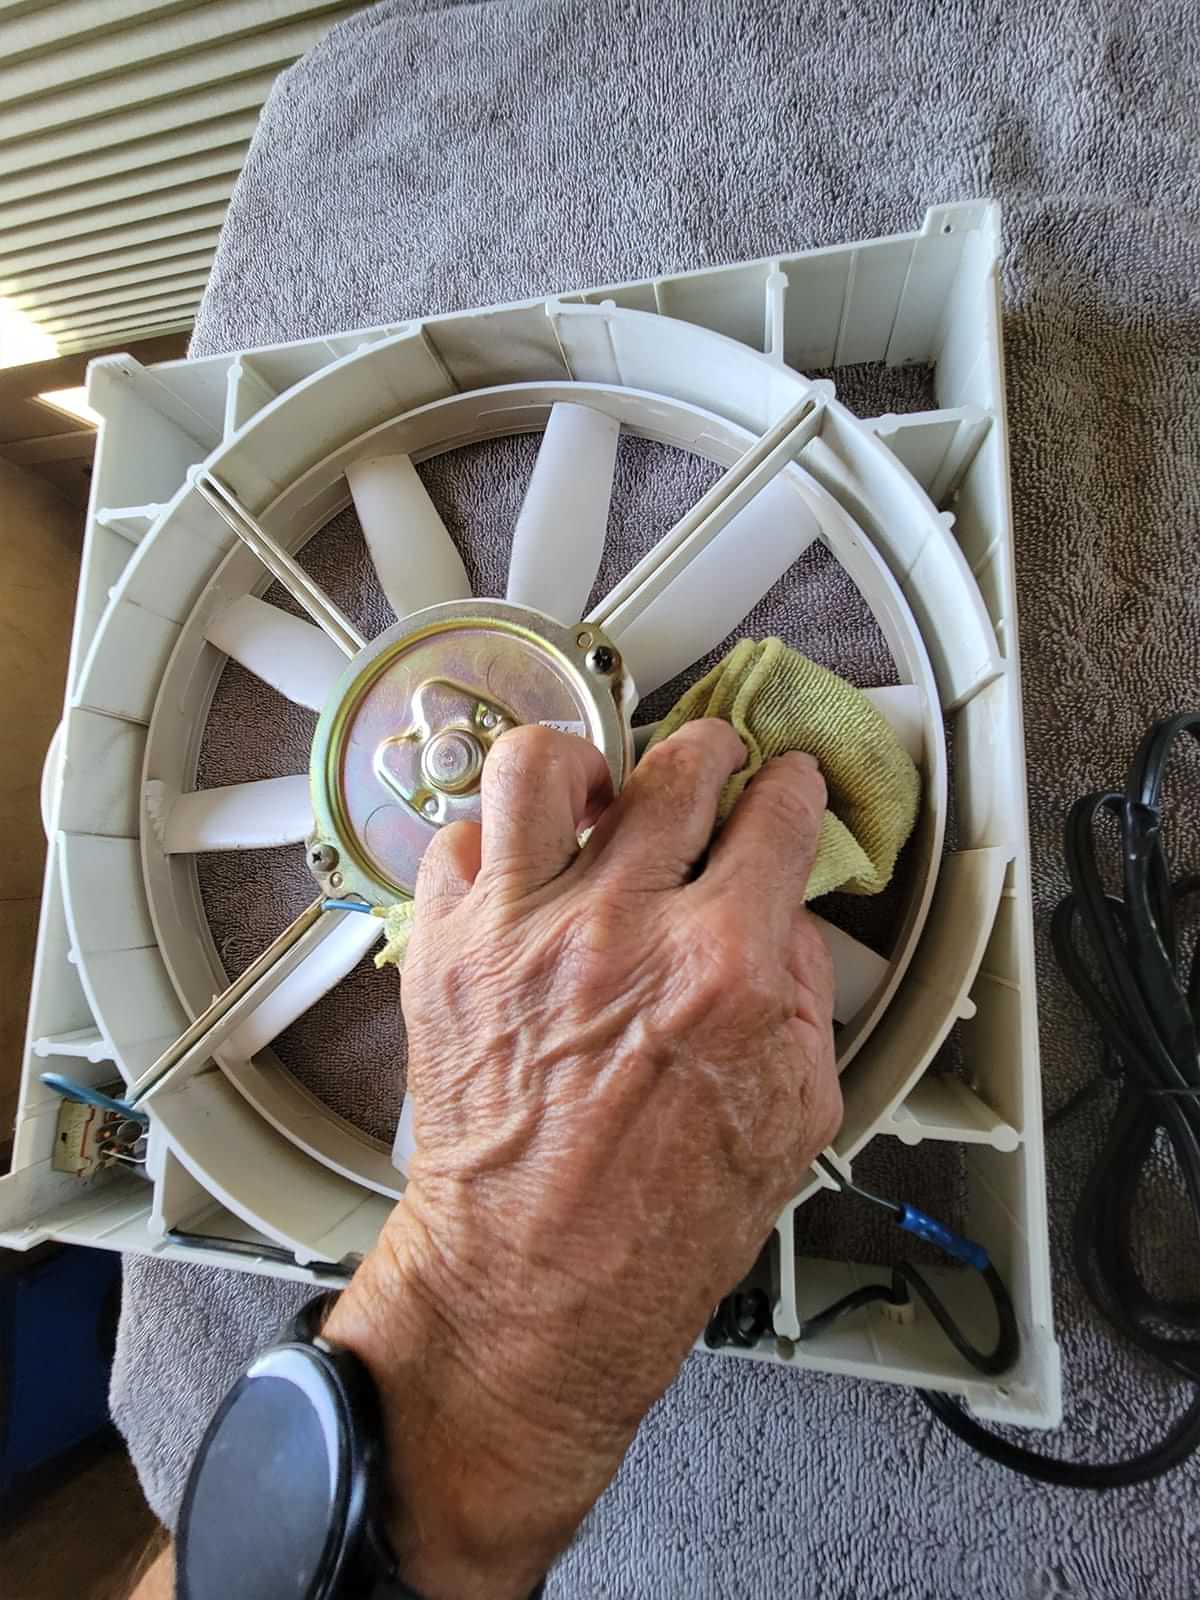 a hand uses a microfiber cloth to clean the exposed blades of the fan